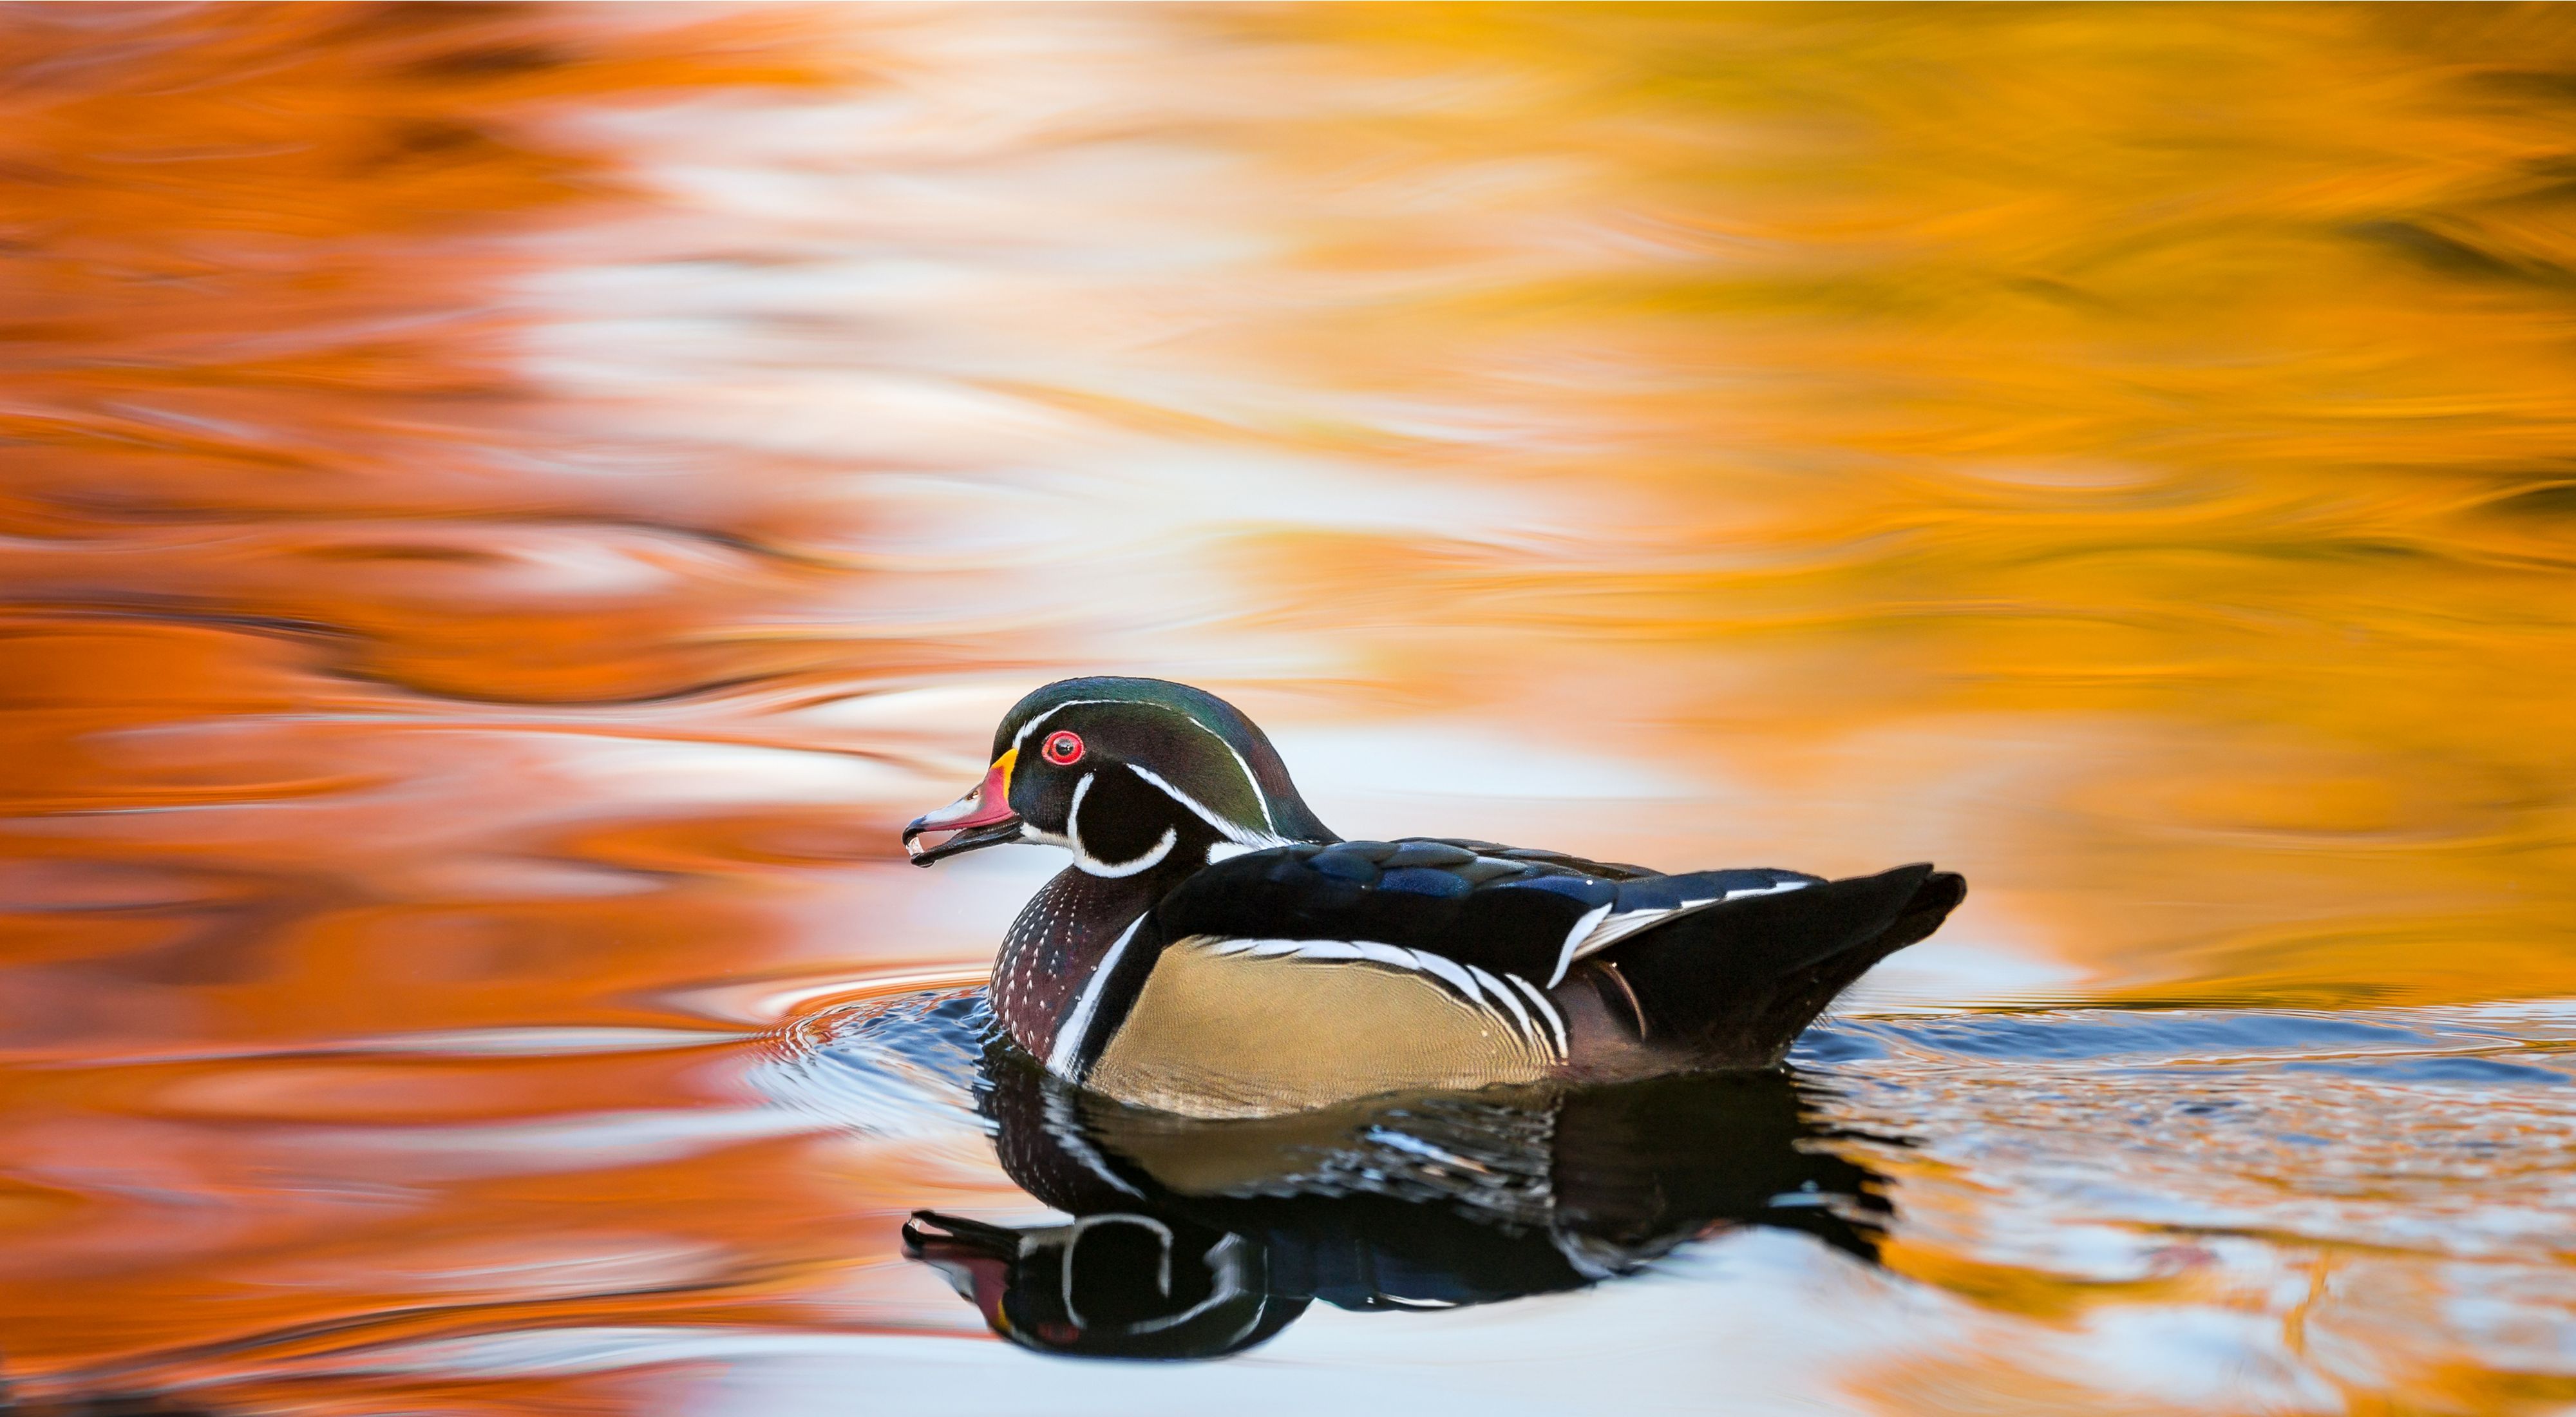 A wood duck floating on water reflecting the colors of the fall leaves above it.